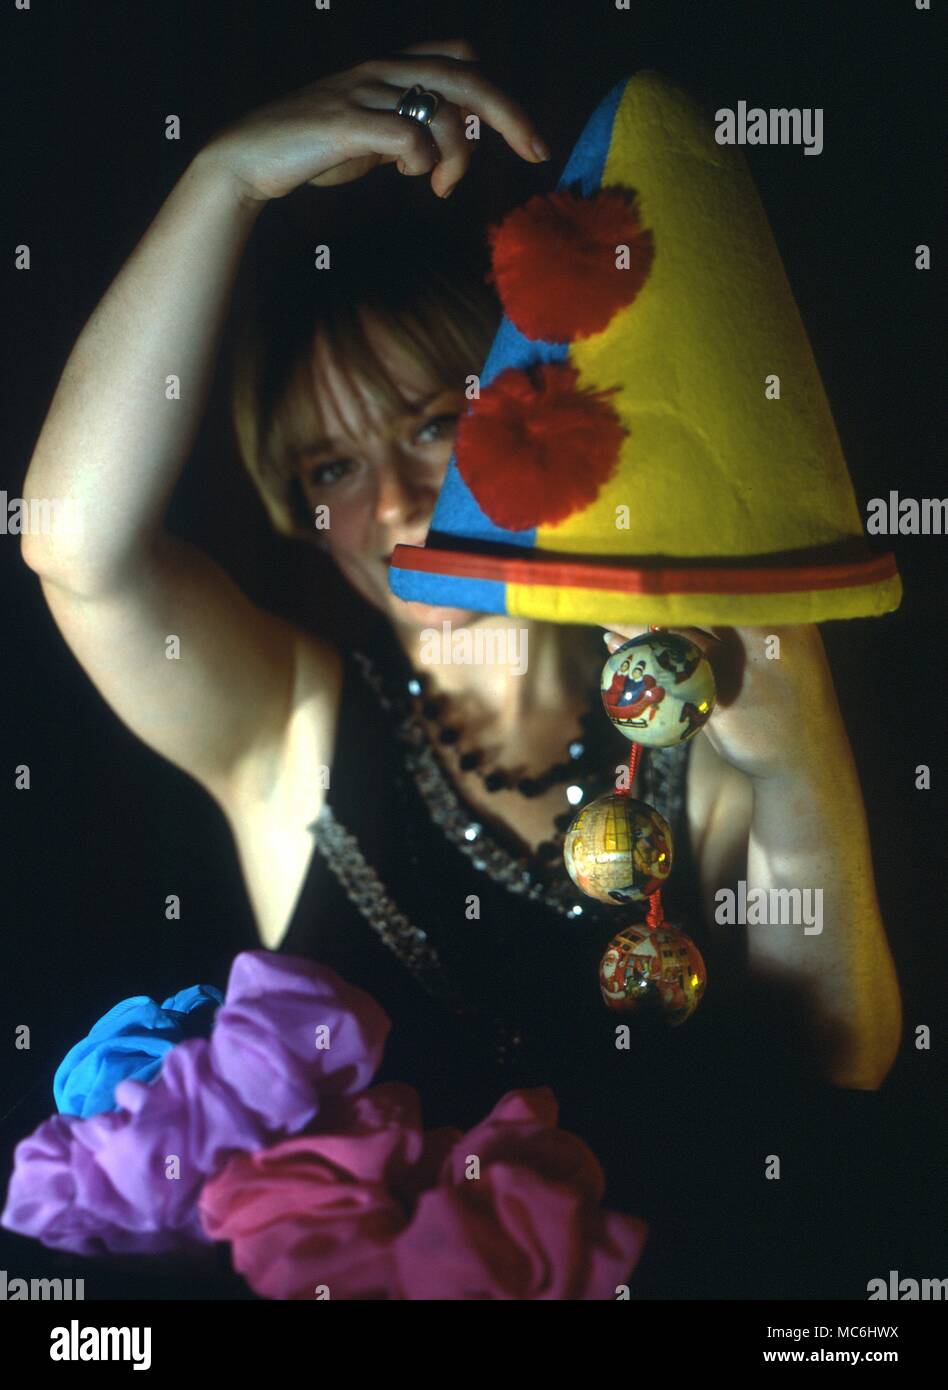 Stage Magic. The girl magician shows that the clown's hat is empty and then proceeds to take an enormous number of objects from it. Stock Photo